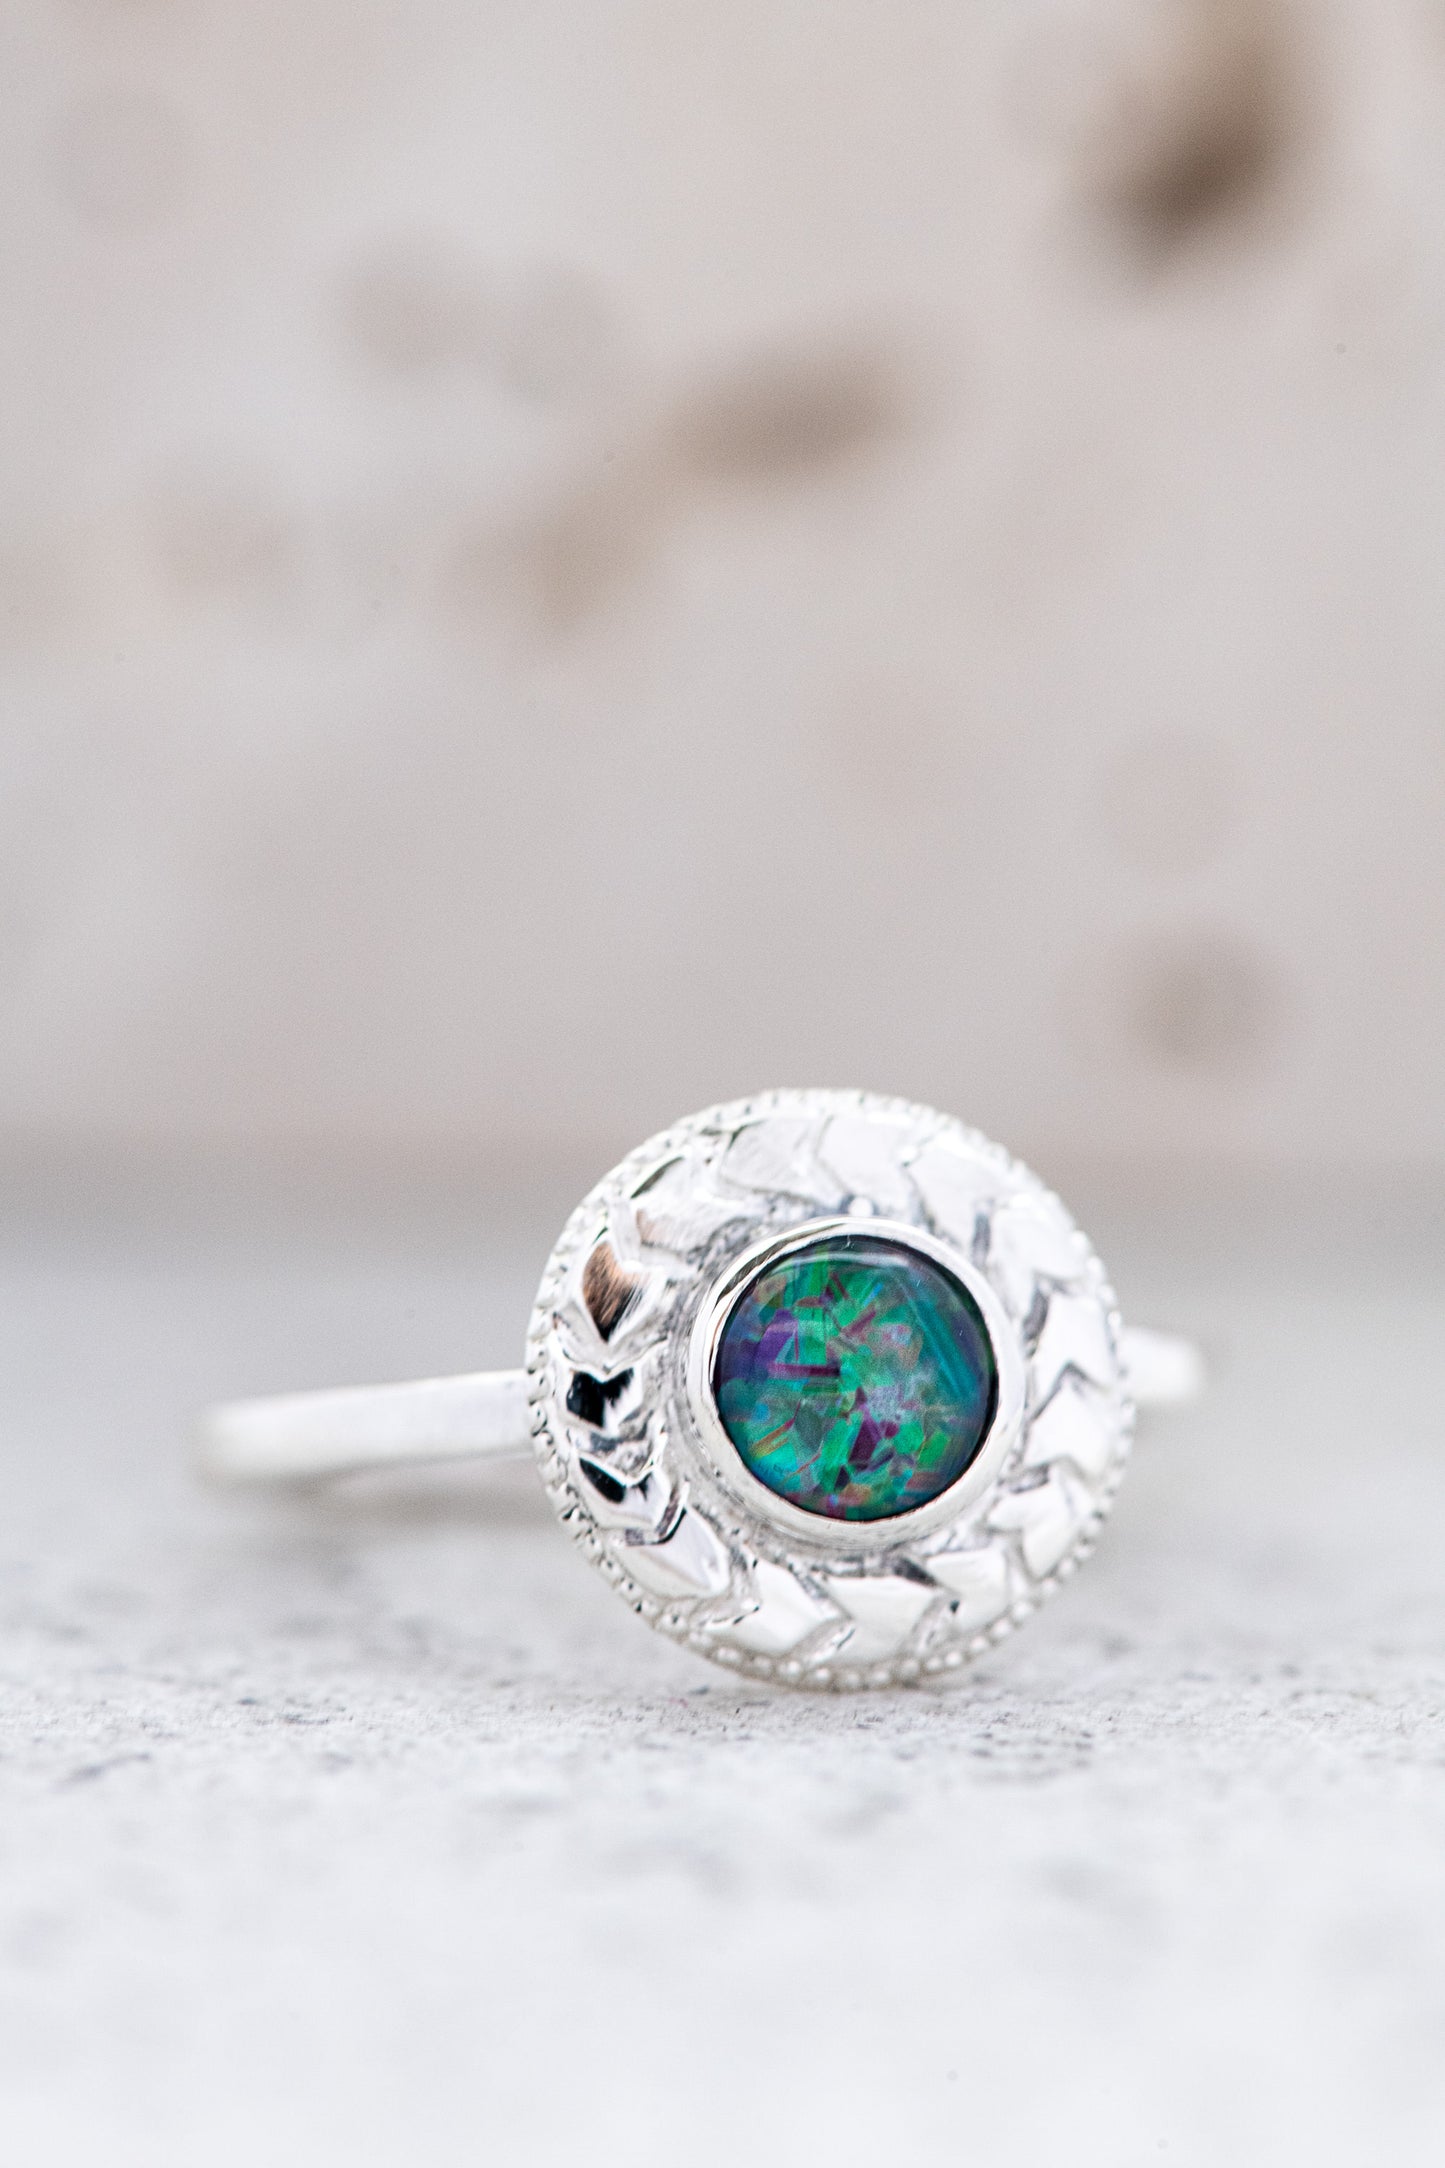 A handmade Australian Fire Opal Ring in 925 Sterling Silver with a green opal stone from Cassin Jewelry.